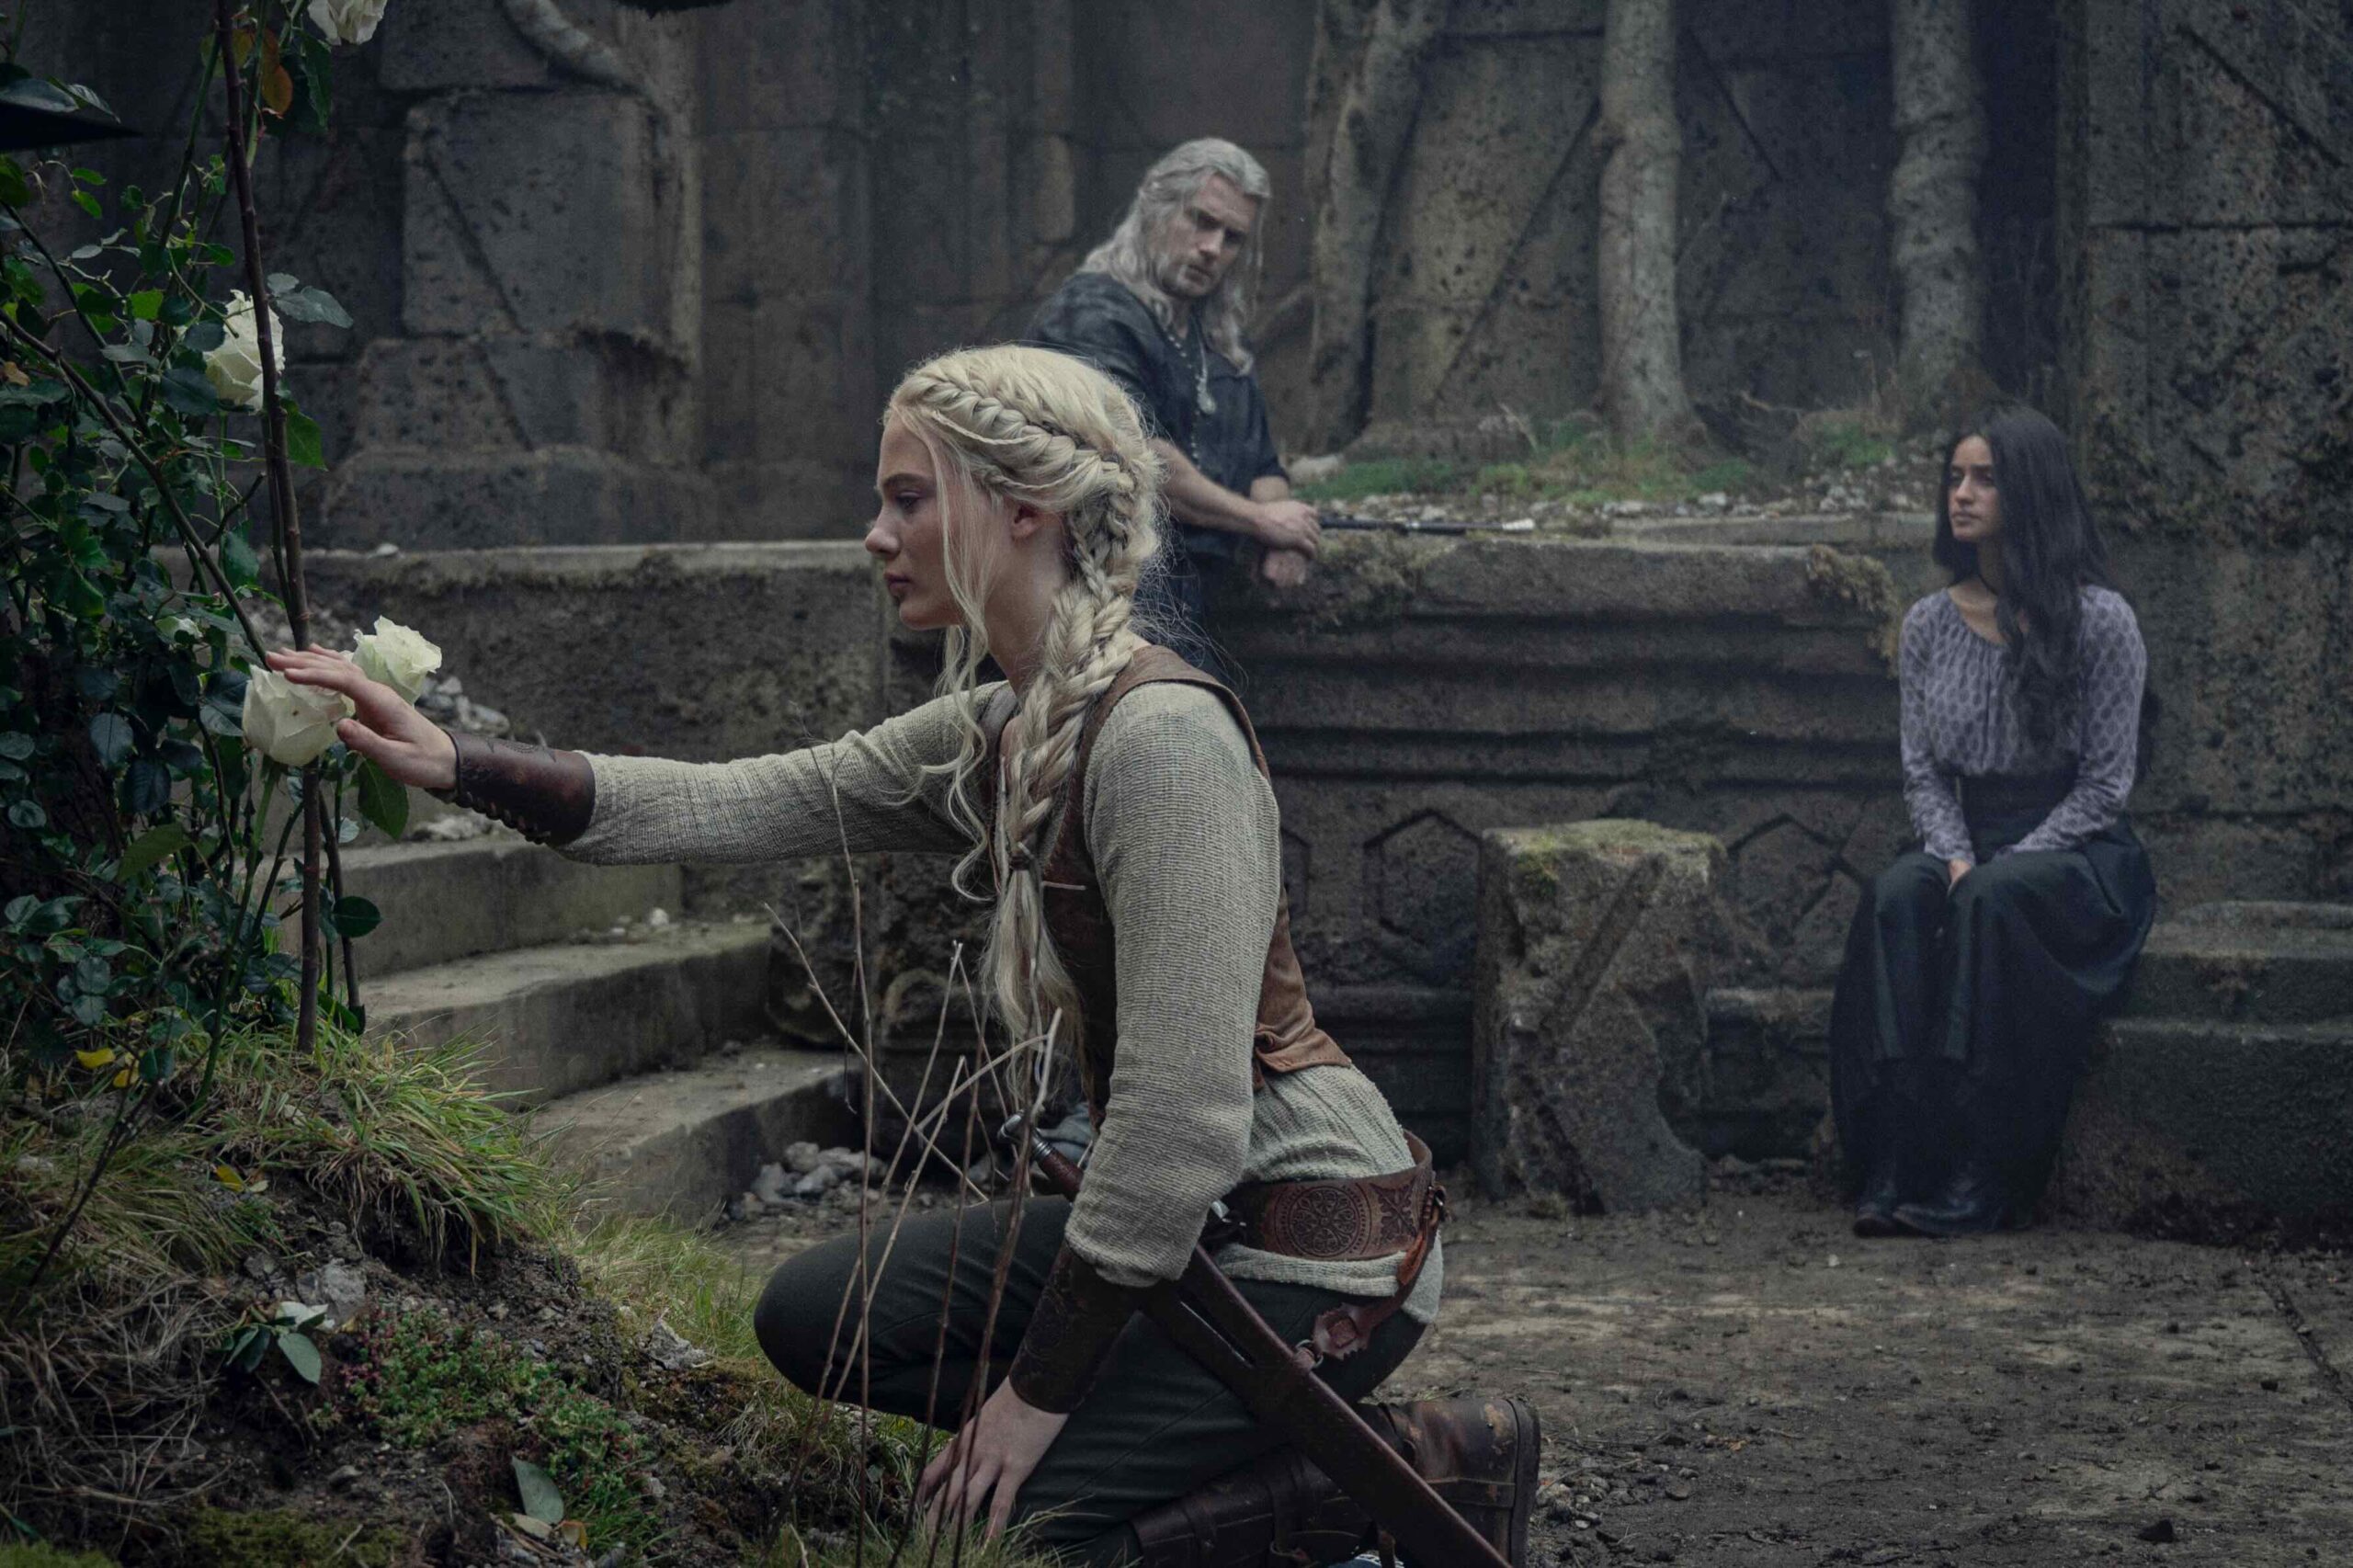 Freya Allan as Ciri, Henry Cavill as Geralt, and Anya Chalotra as Yennefer in The Witcher season 3